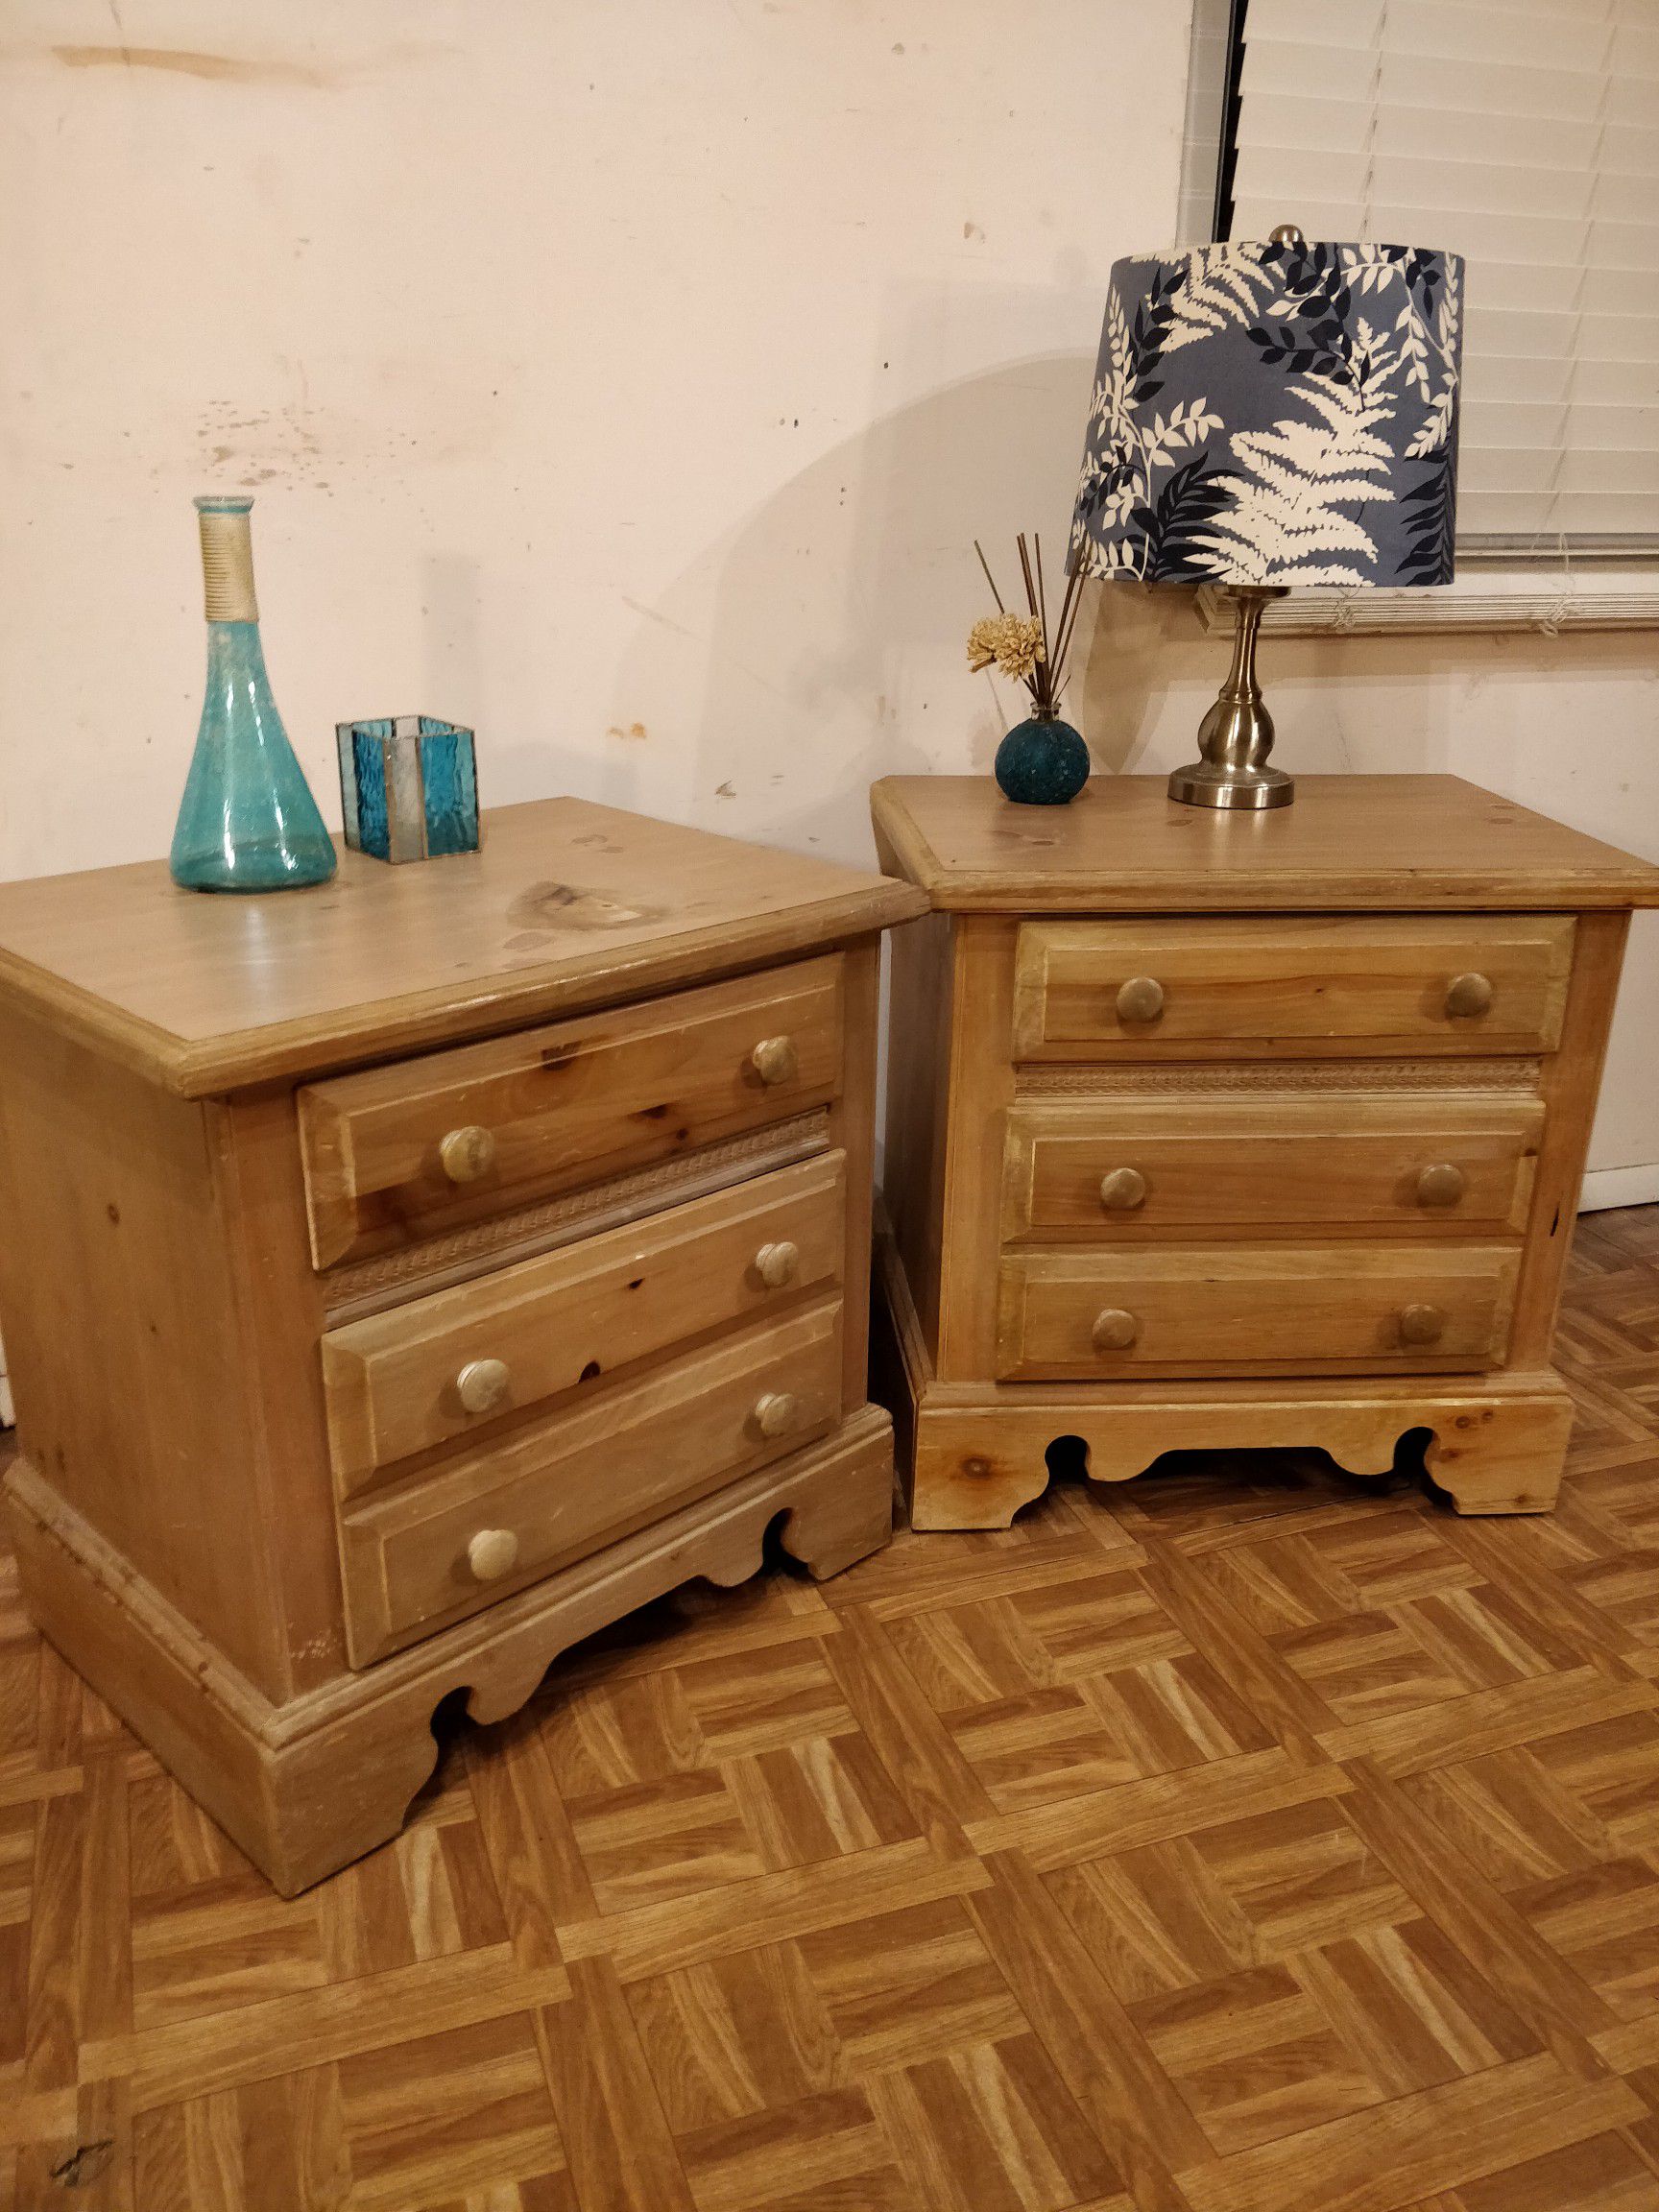 Nice 2 night stand with big drawers in good condition. L25"*W18"*H25"